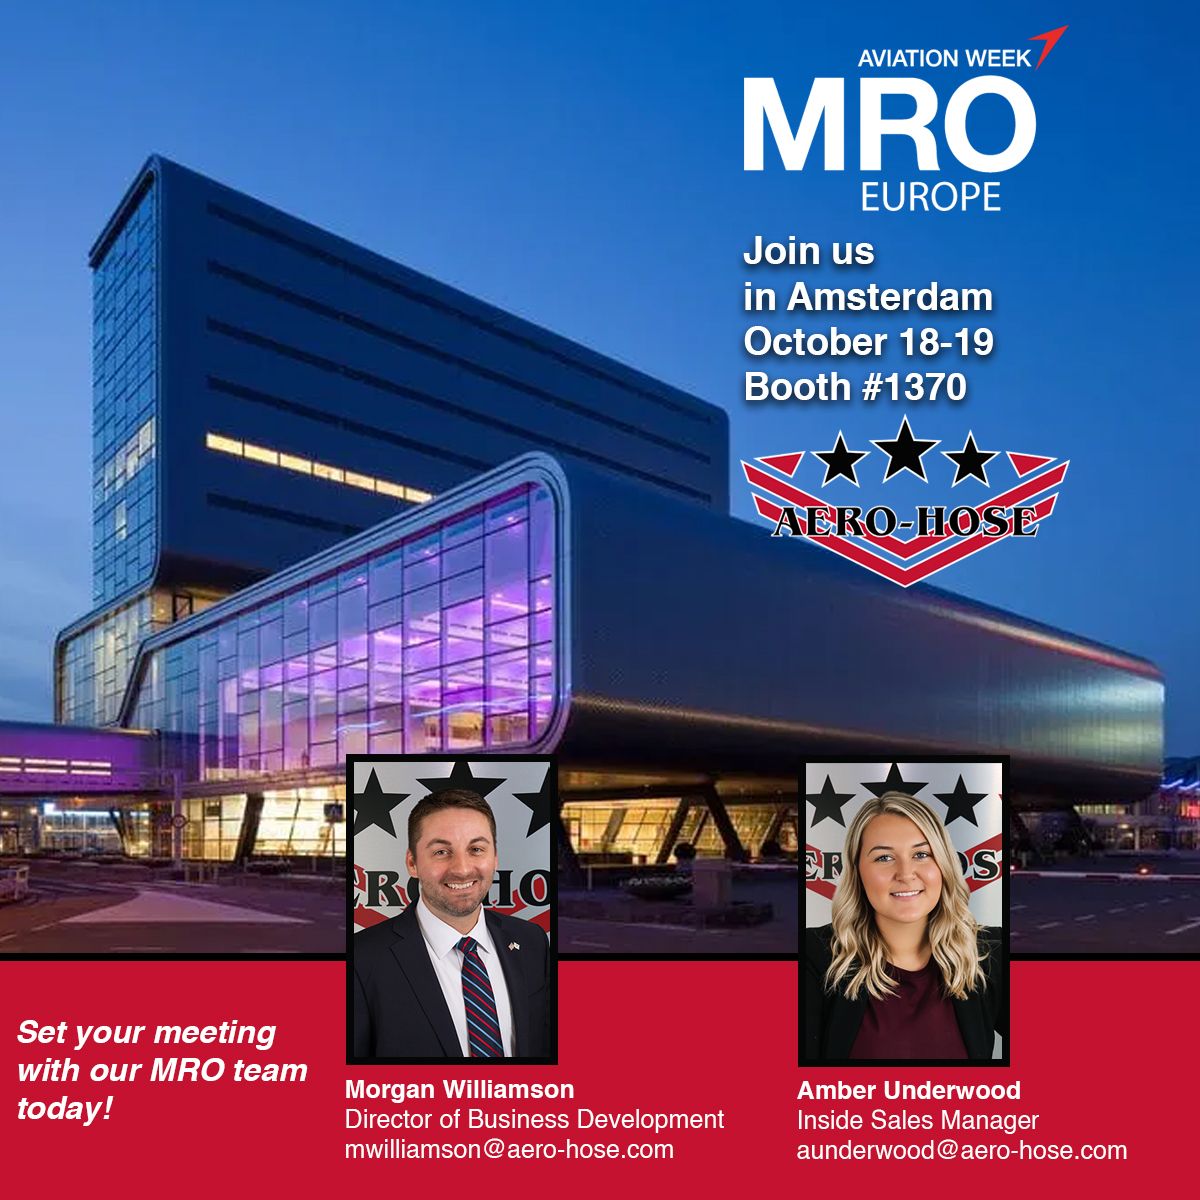 promotional image for mro europe 2024 event in amsterdam featuring the venue's exterior, event dates on october 18-19, booth number, and photos with names and titles of two team